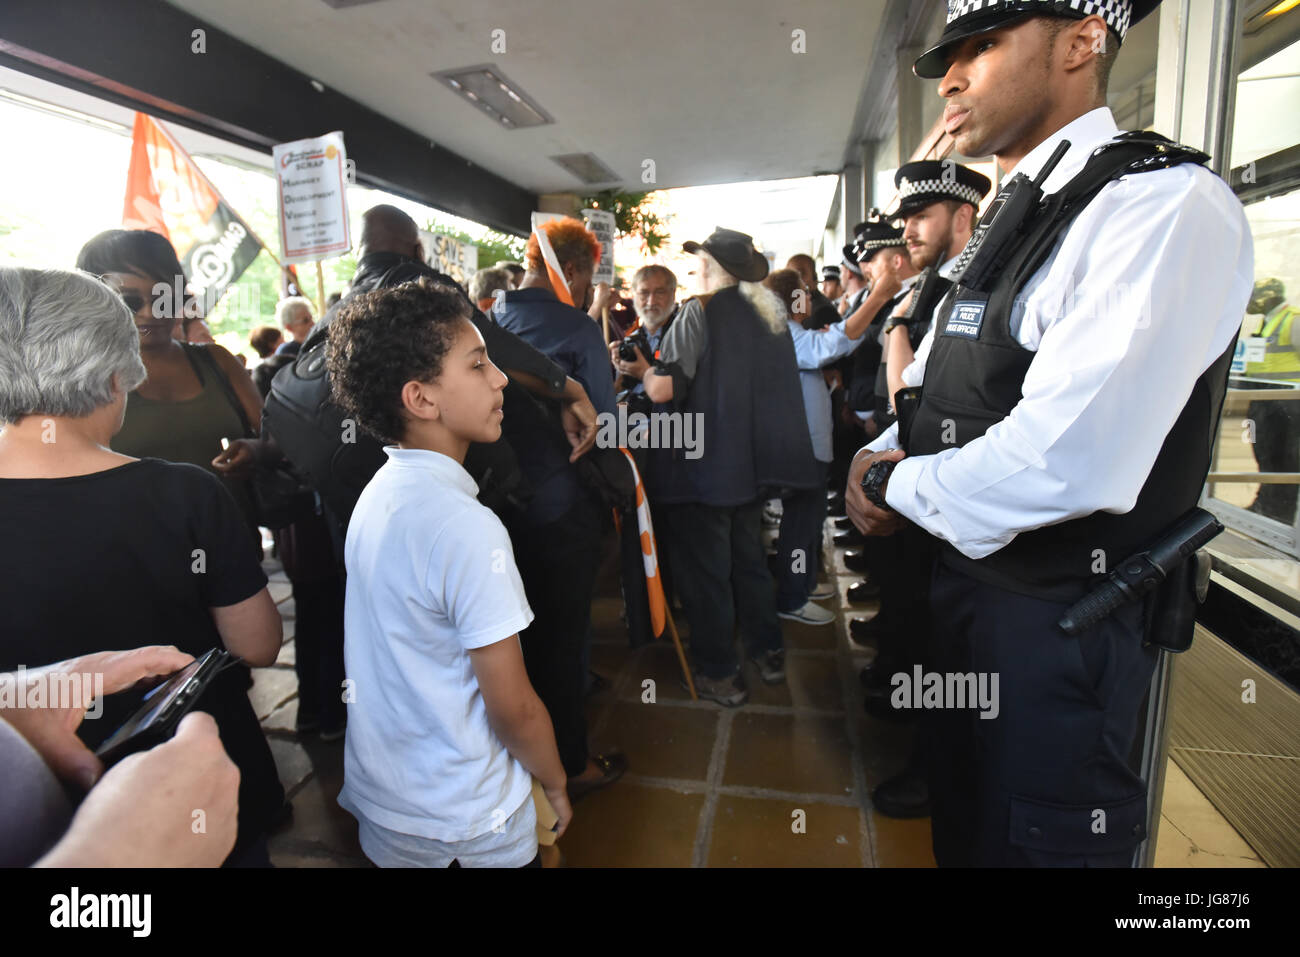 Wood Green, London, UK. 3rd July 2017. HDV Demonstration and march through Wood Green to  Haringey council civic centre against the HDV, a jointly owned private company of Haringey Council and private developer Lendlease, due to start today, 3rd July. Credit: Matthew Chattle/Alamy Live News Stock Photo